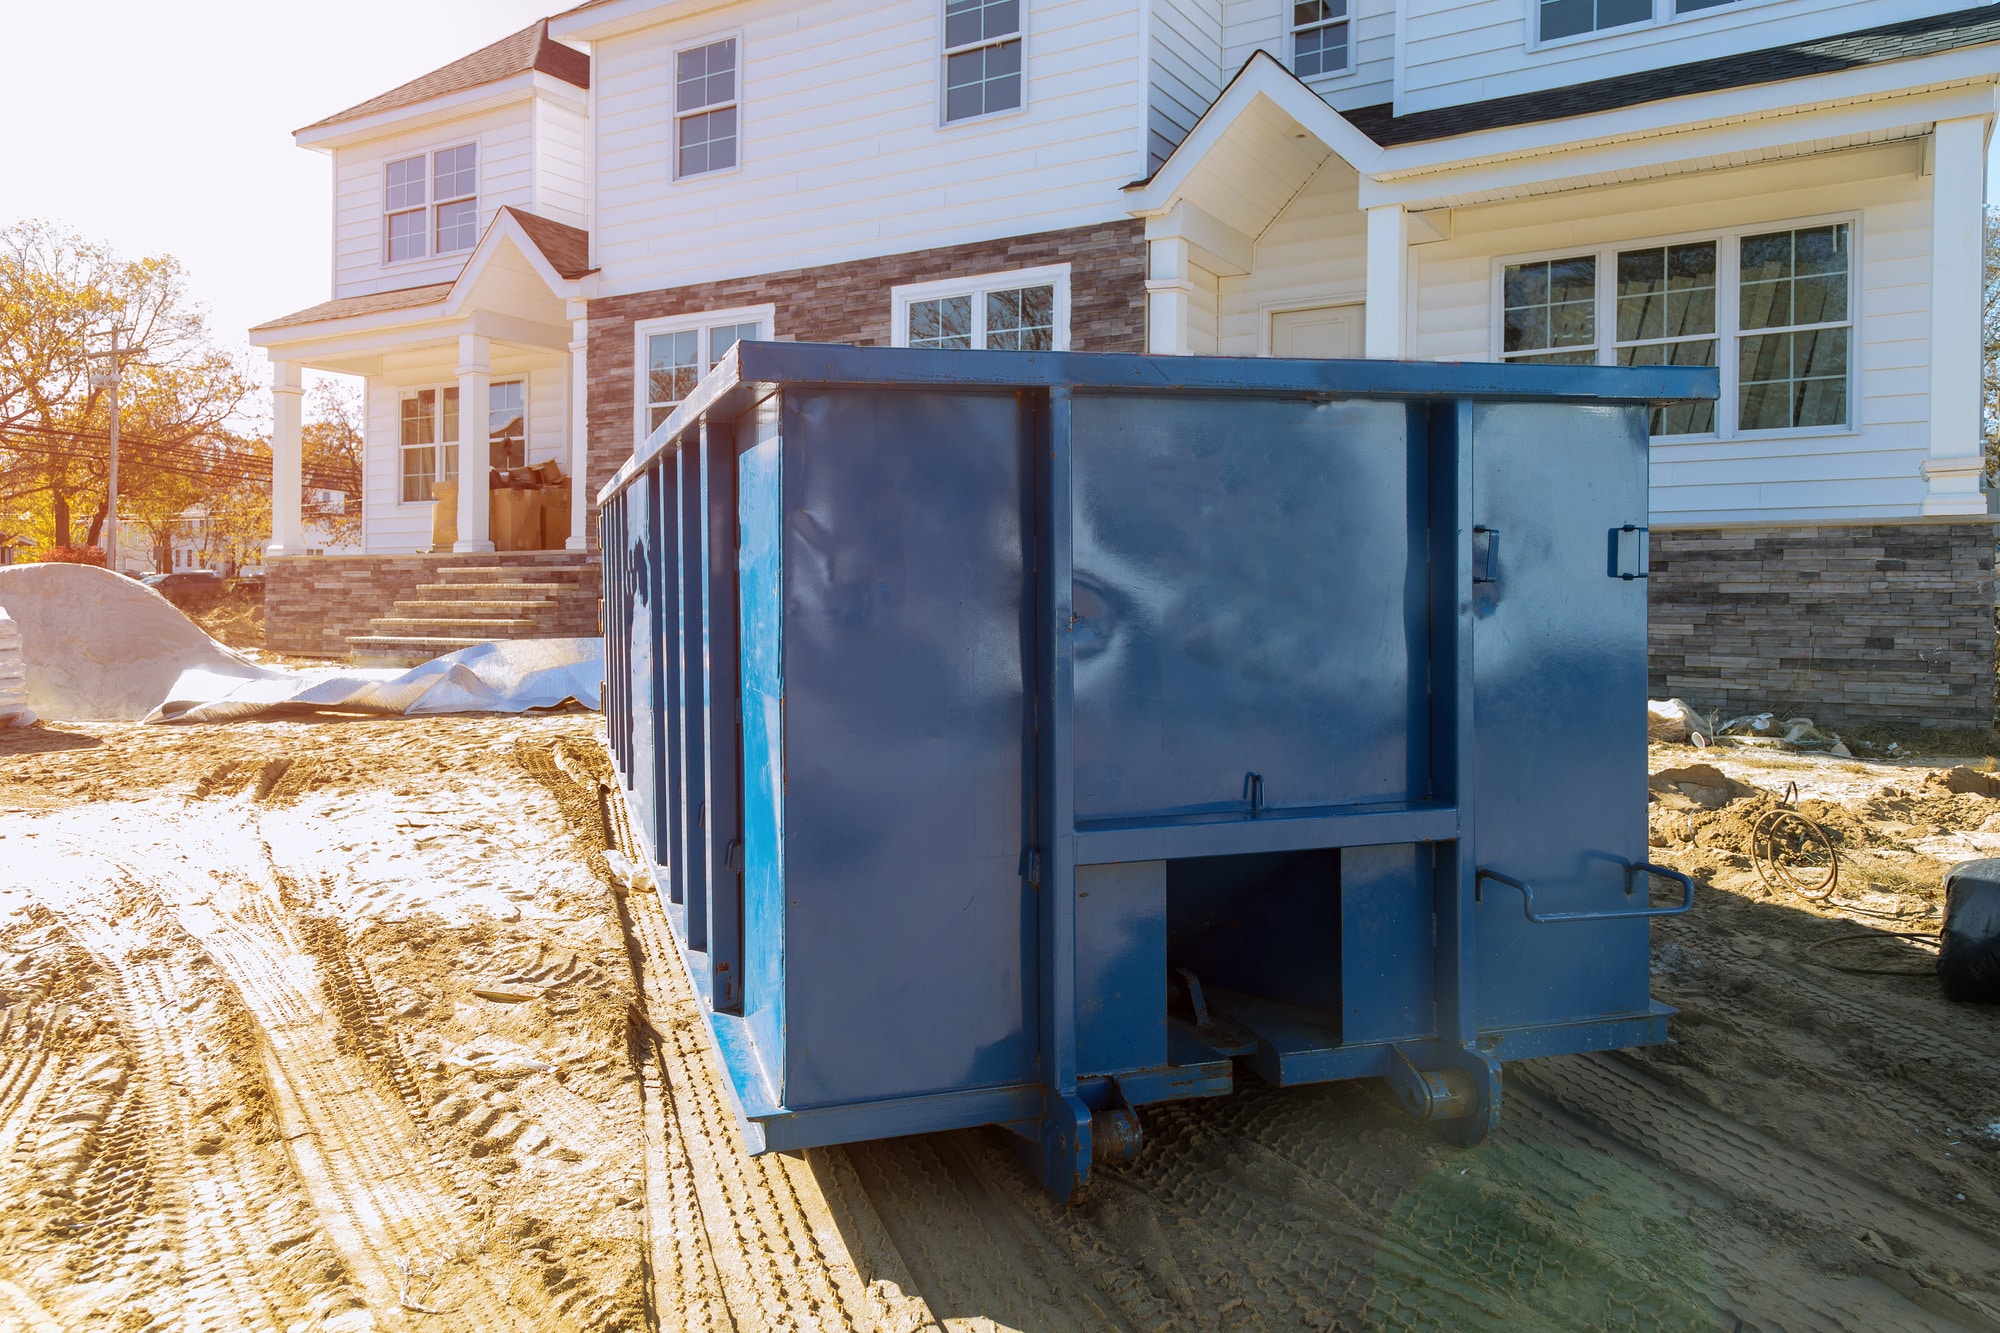 Finding The Best Construction Dumpster Company For Your Renovation